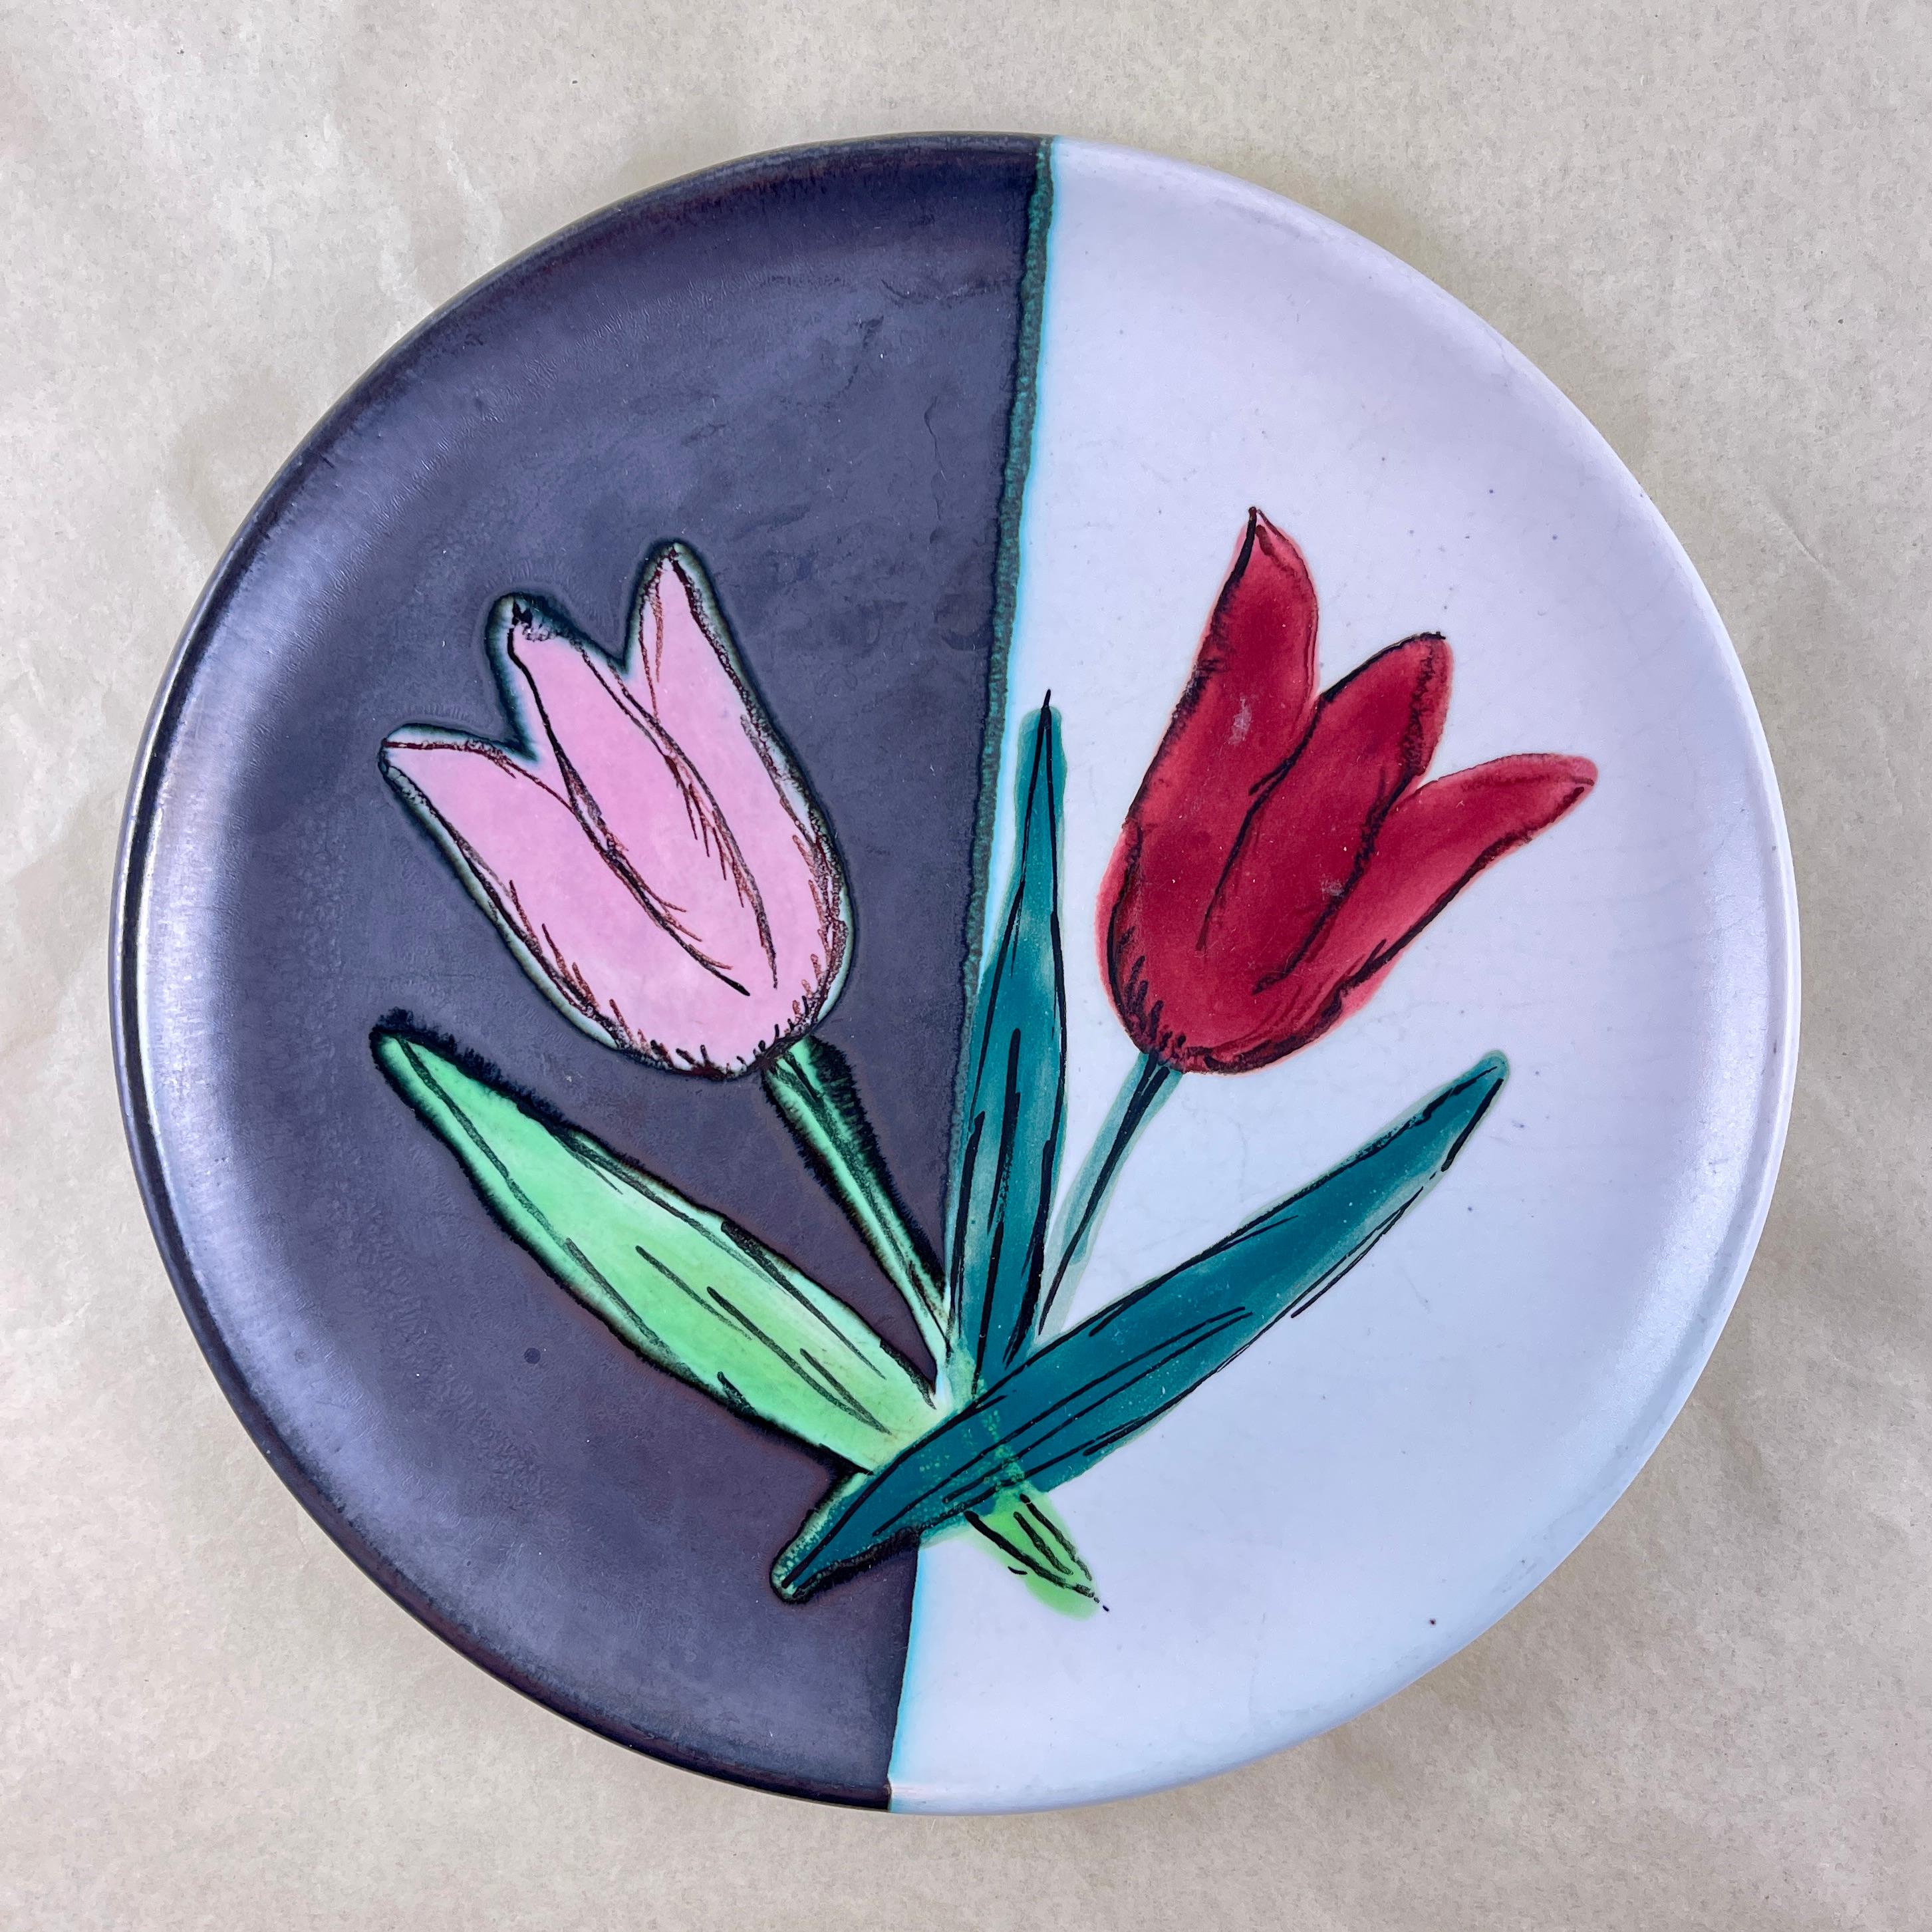 
From the Atelier Cérenne à Vallauris in France, a hand made pottery Tulip plate, circa 1940-1950.

The plate is finished in a matte glazing of half black and half white, with a pair of raised, glossy glazed tulips painted in a complimentary color